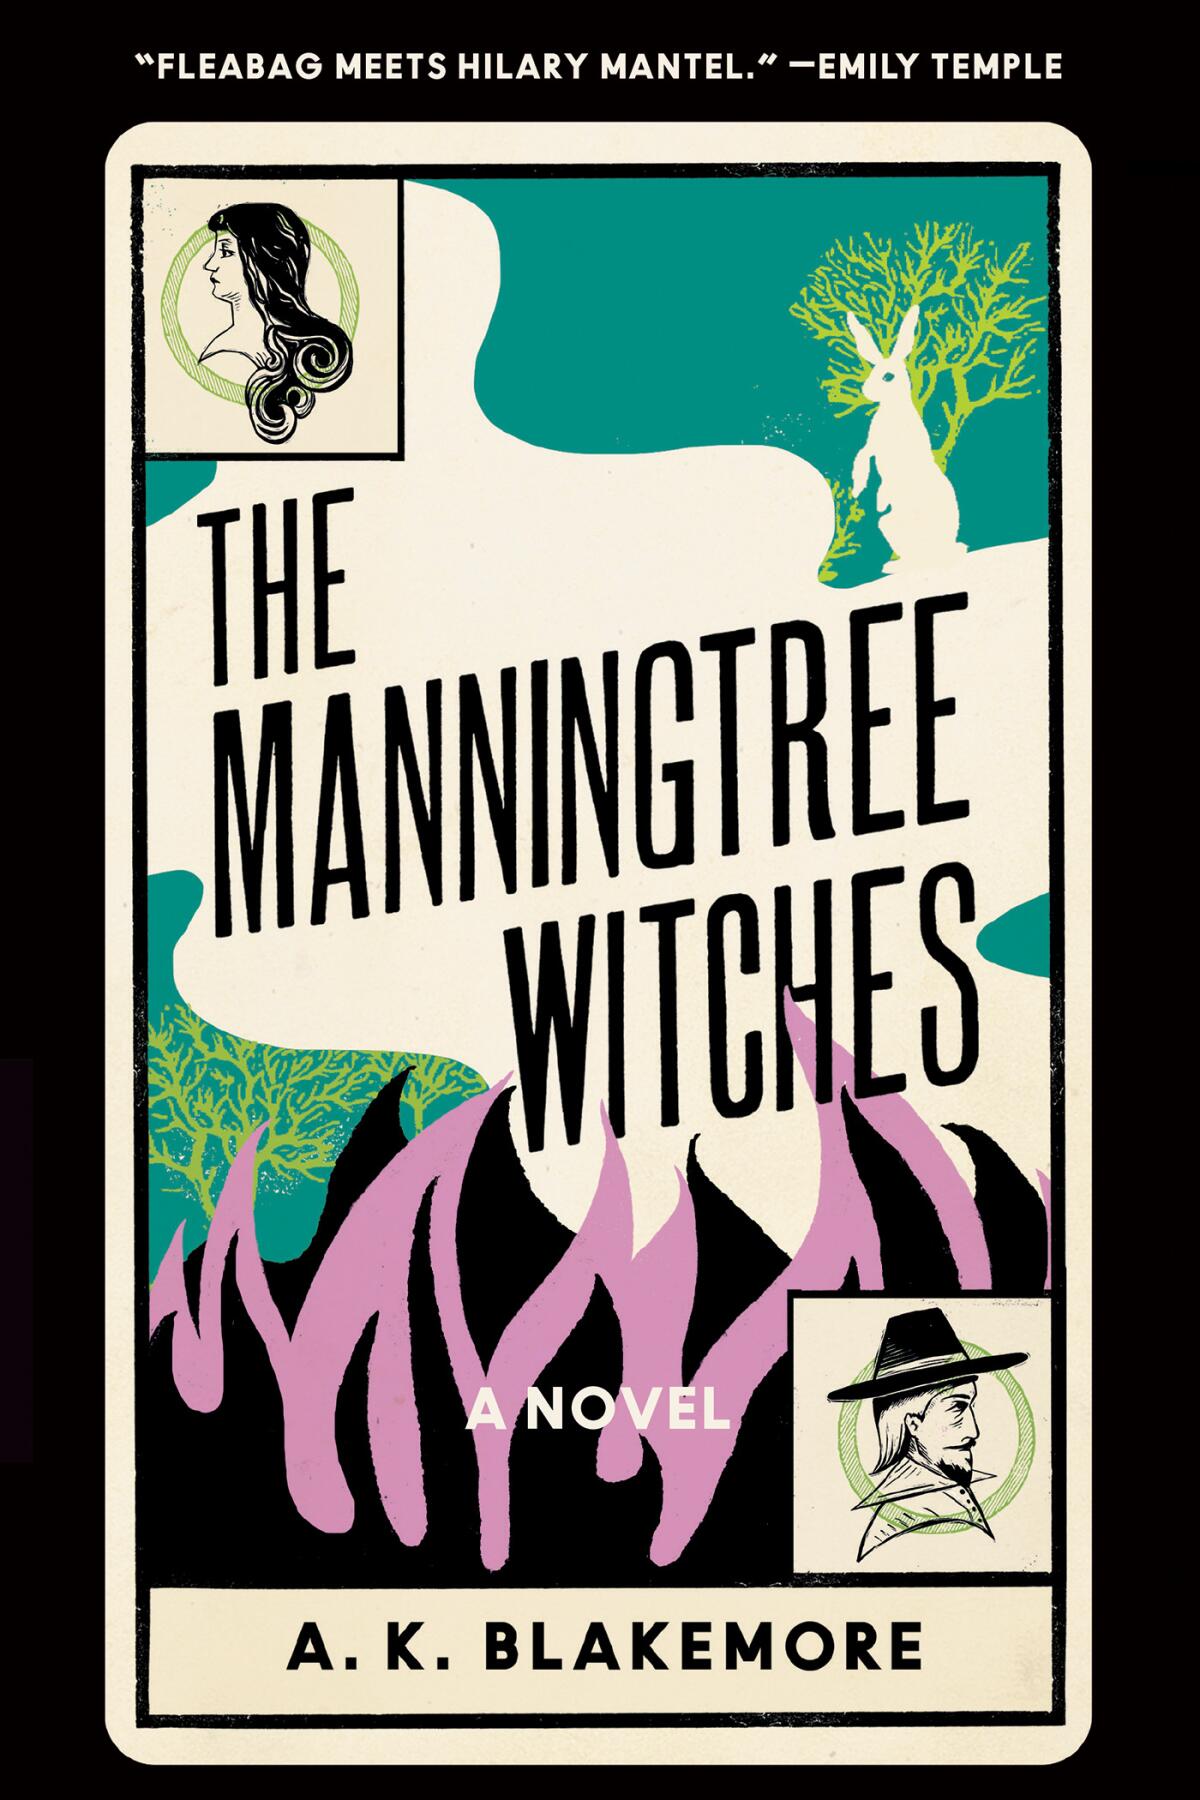 "The Manningtree Witches," by A. K. Blakemore